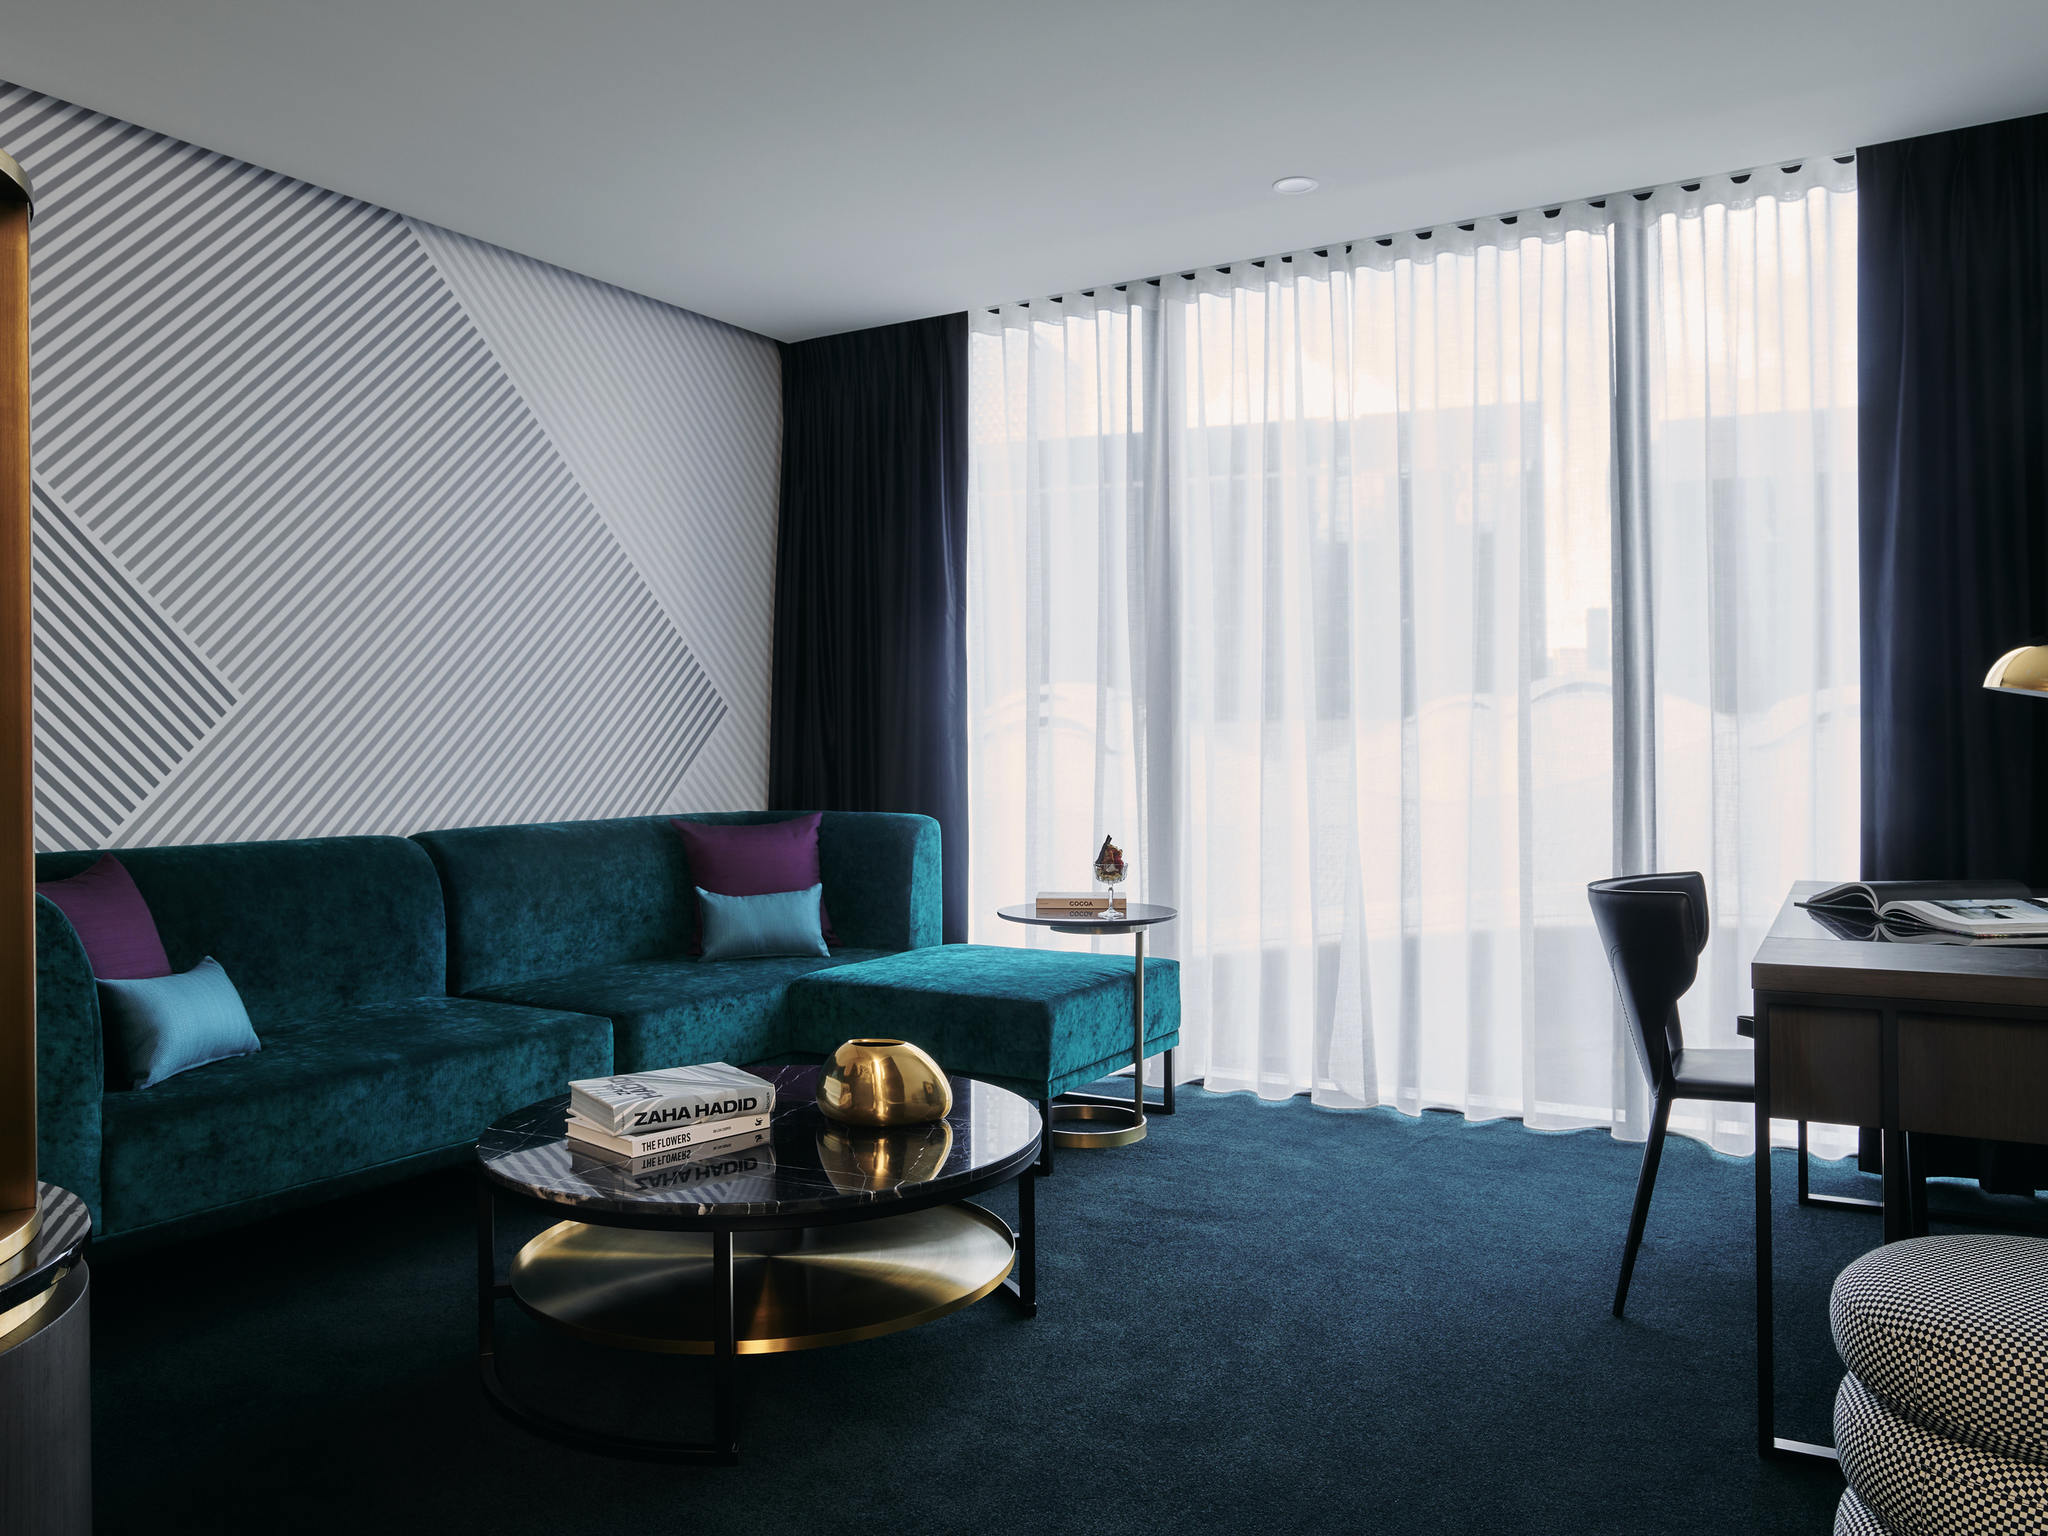 Mövenpick Hotel Melbourne on Spencer – contemporary luxury in the heart of the city.